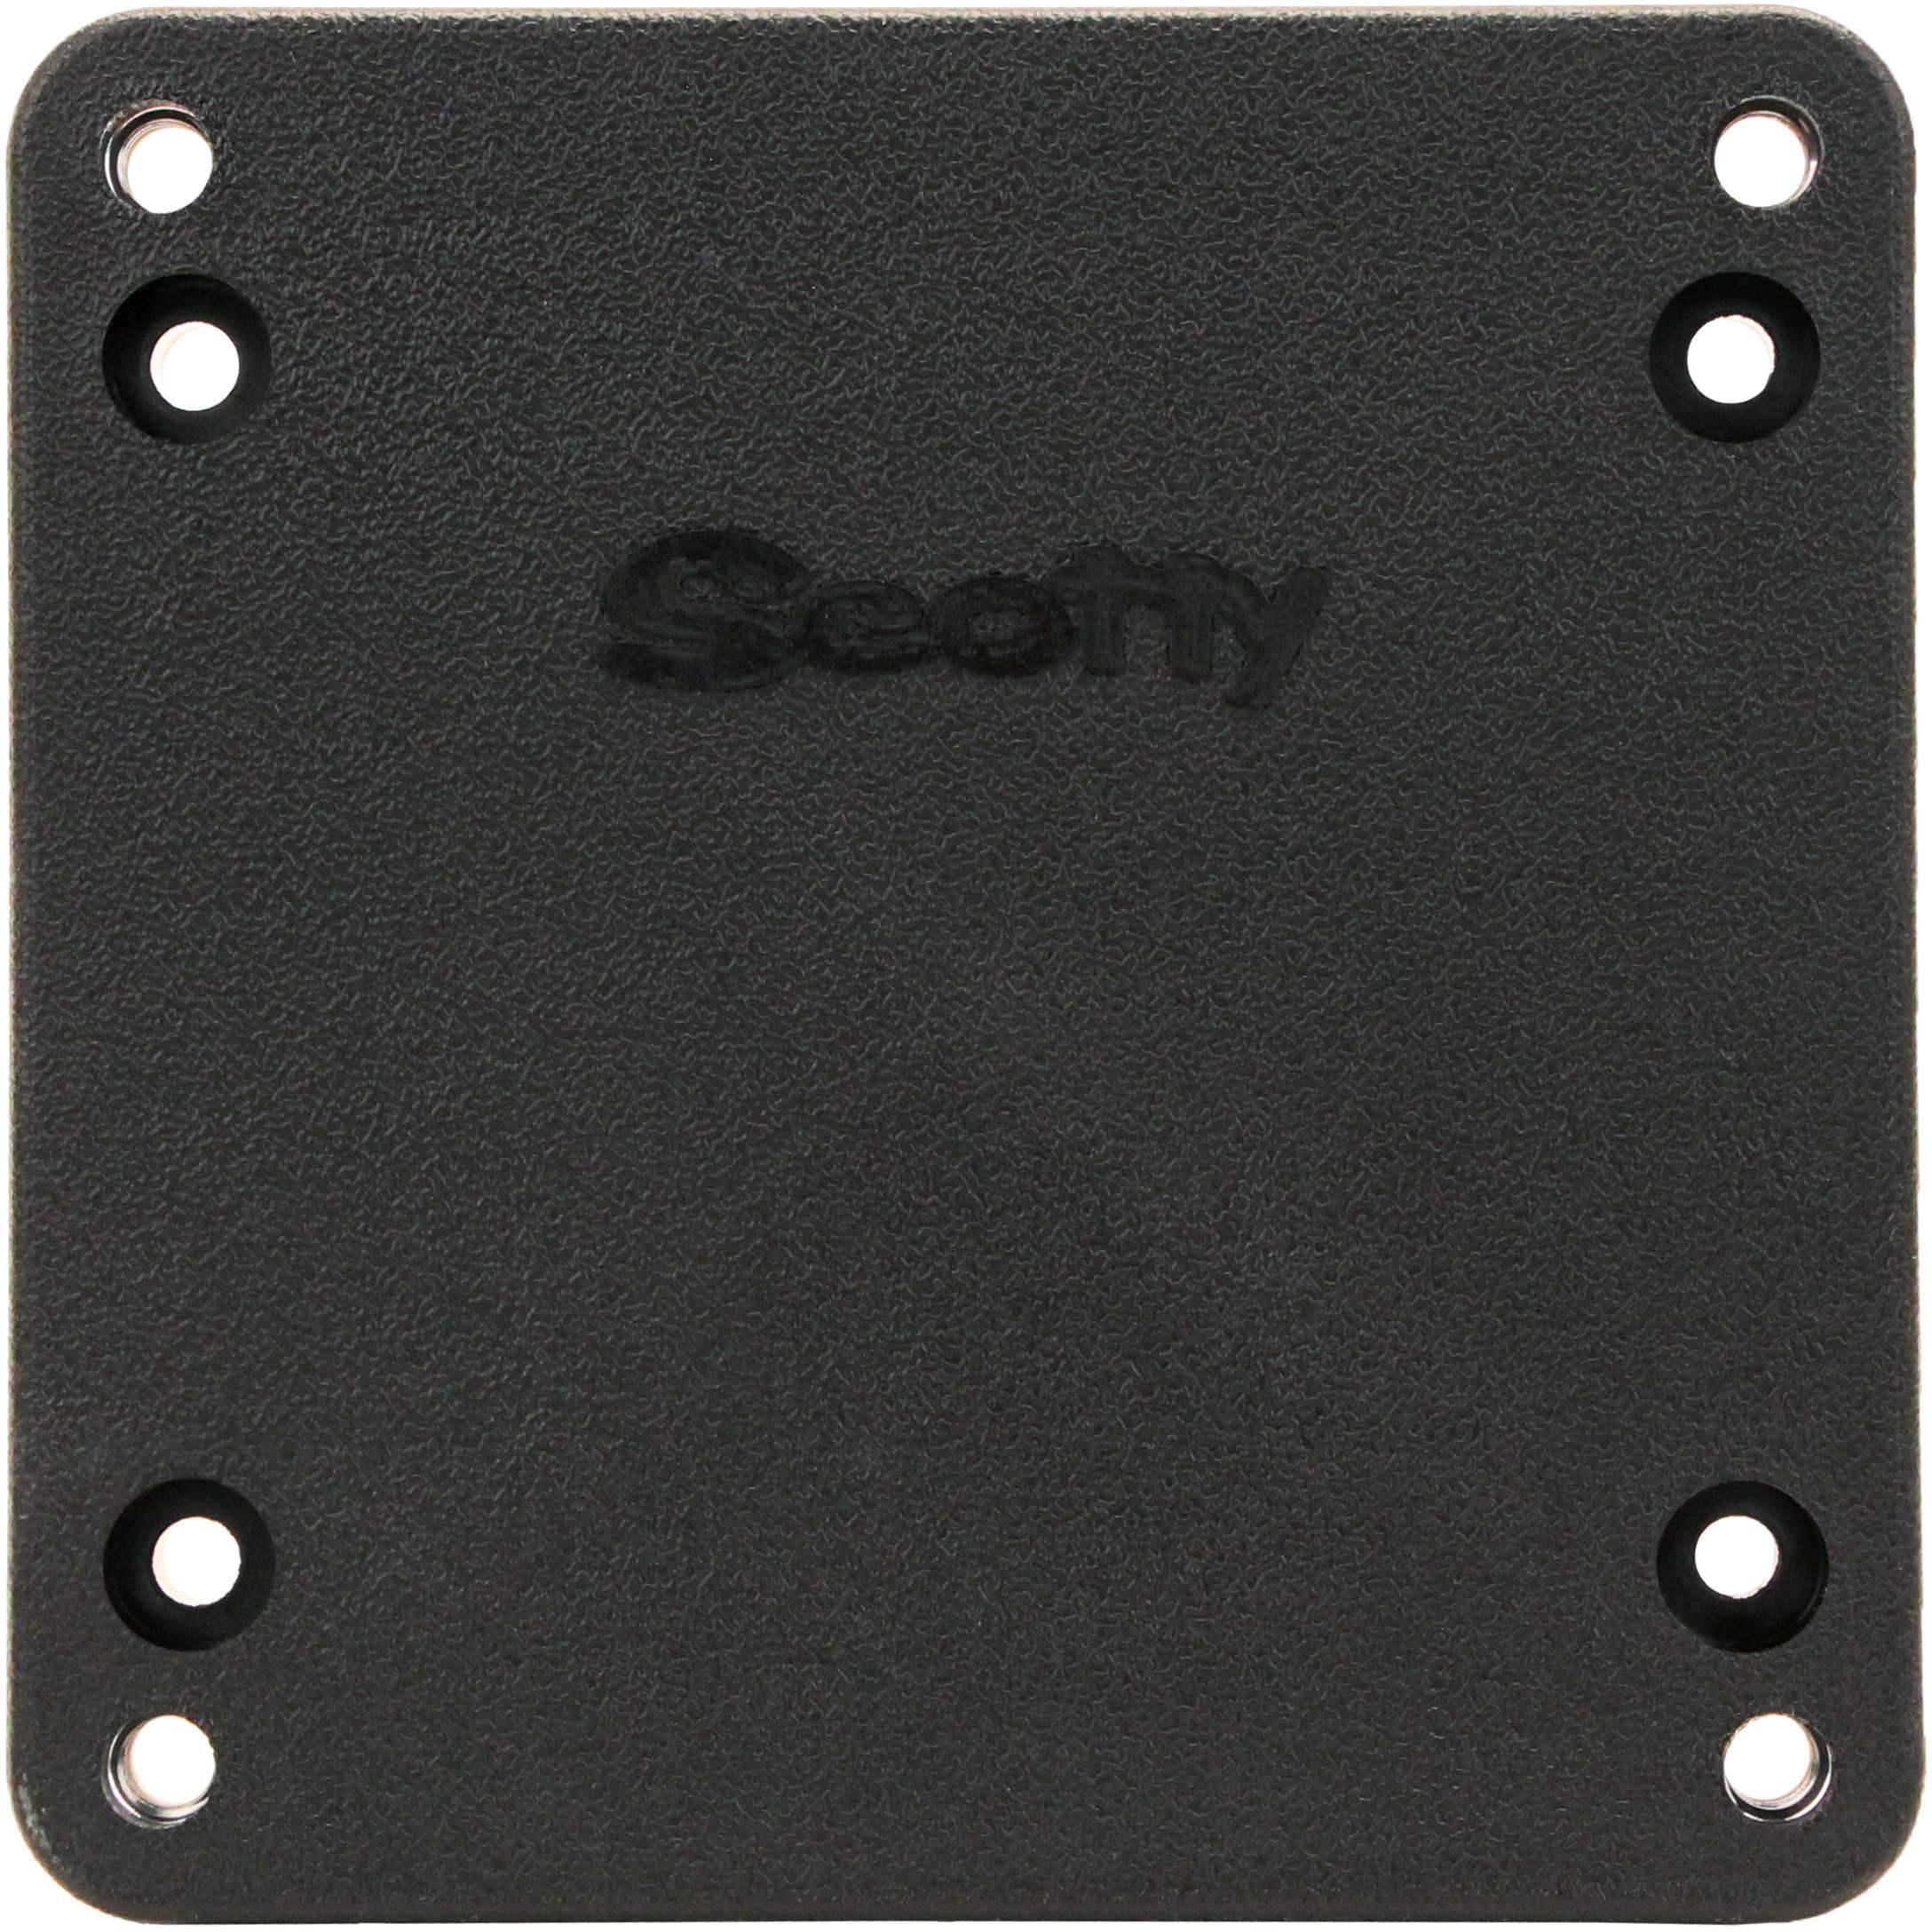 Scotty Mounting Plate Only f/1026 Swivel